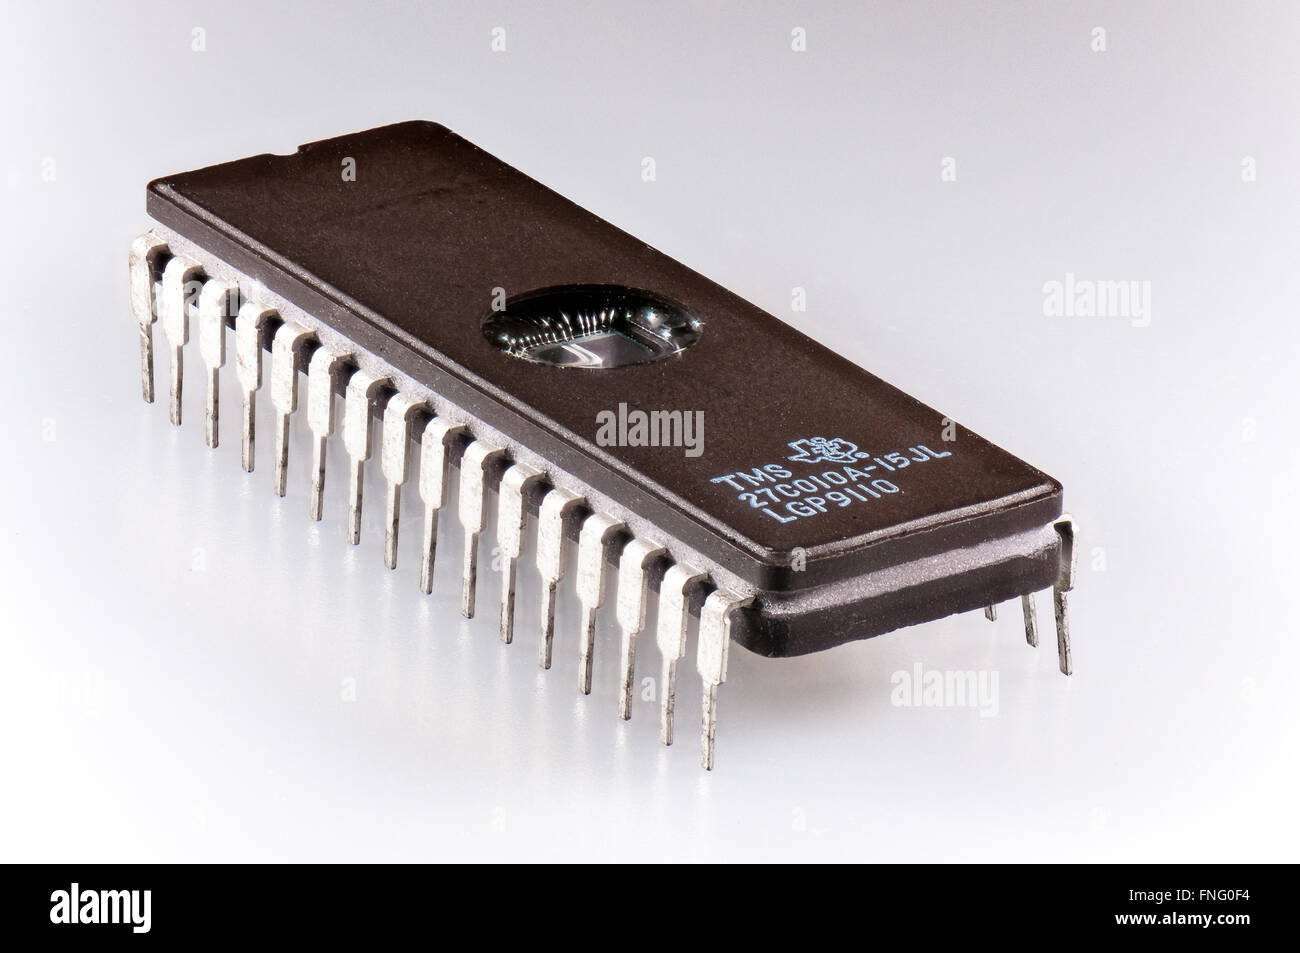 EPROM integrated circuit chip on a white background Stock Photo